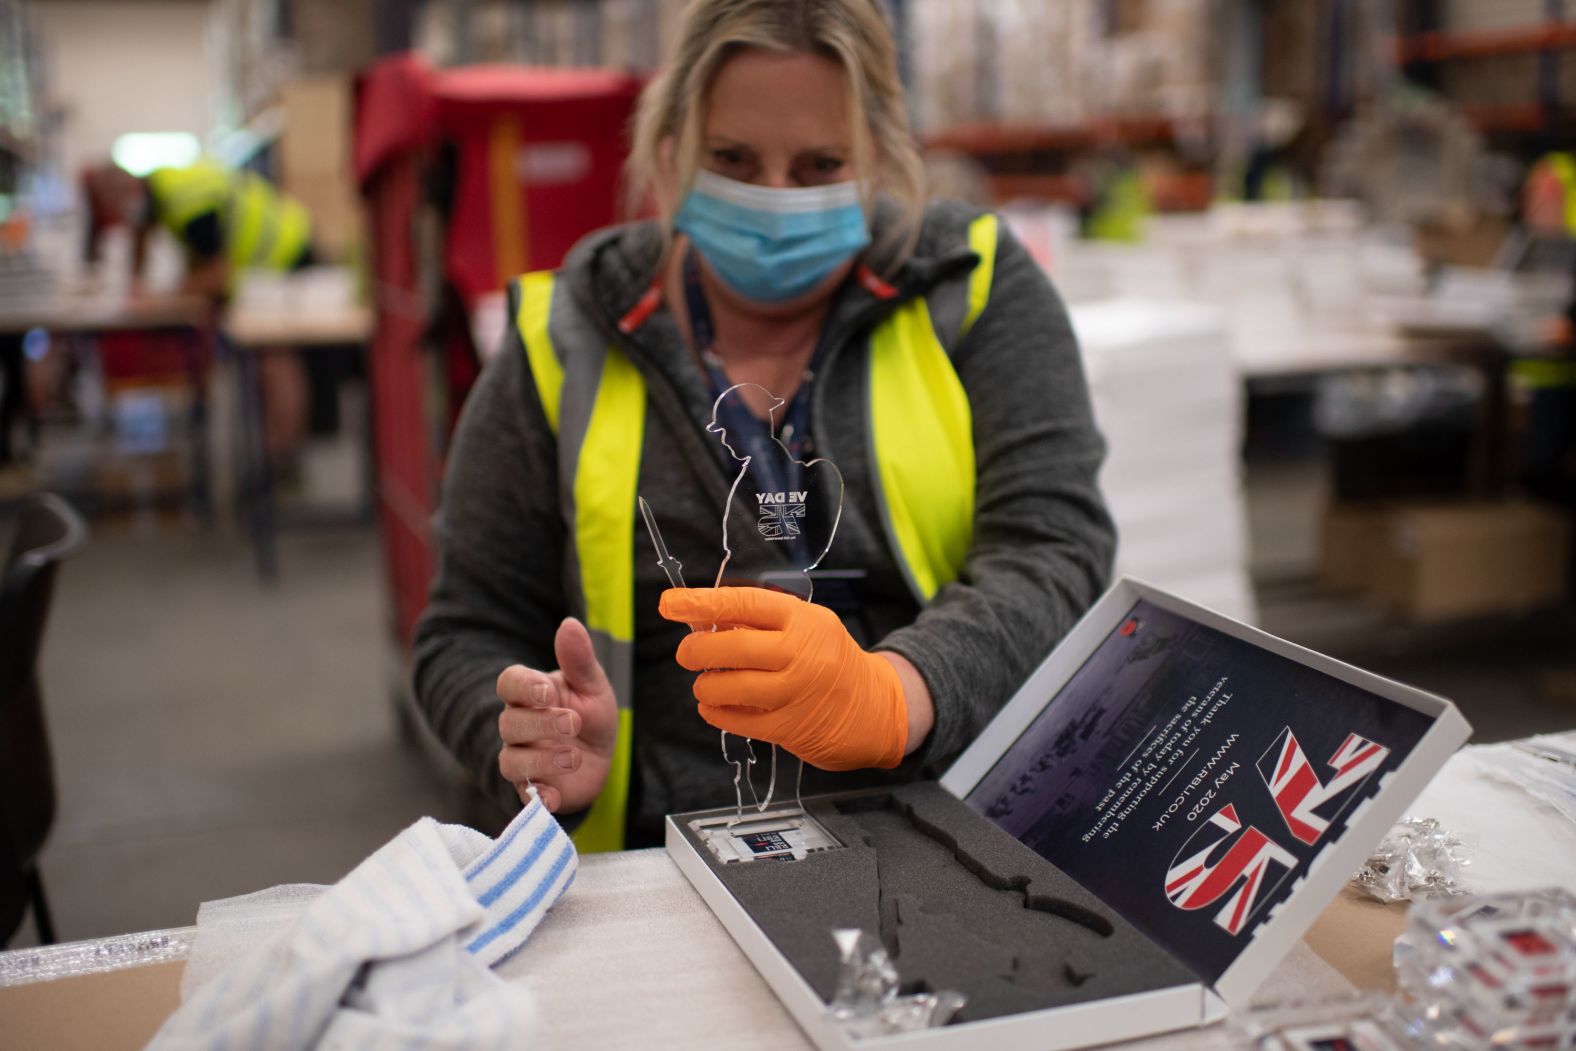 A factory worker in Aylesford, England, prepares commemorative figures for VE Day while wearing personal protective equipment to guard against the coronavirus on Tuesday, May 5.